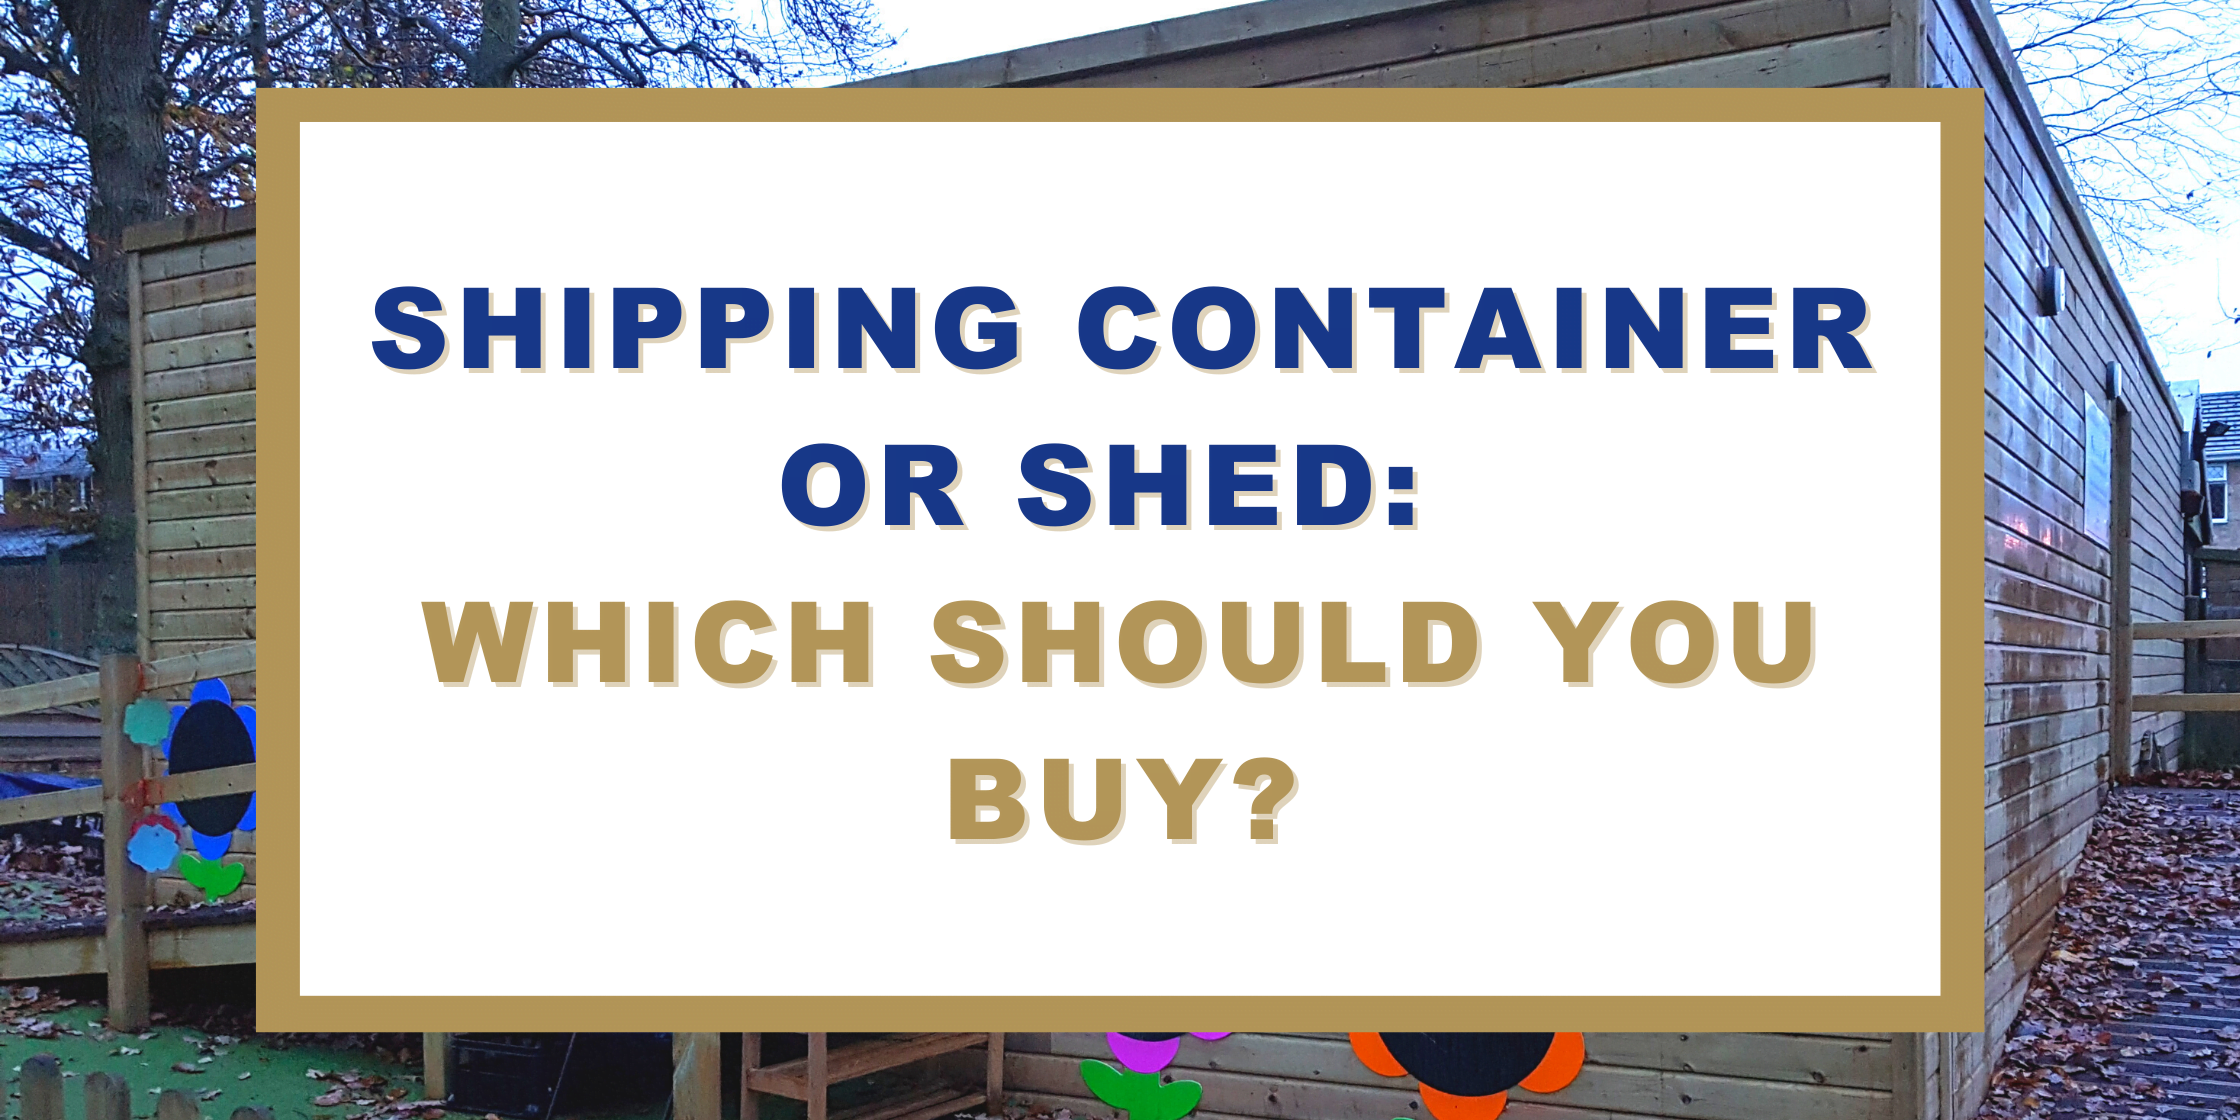 Shipping Container or Shed